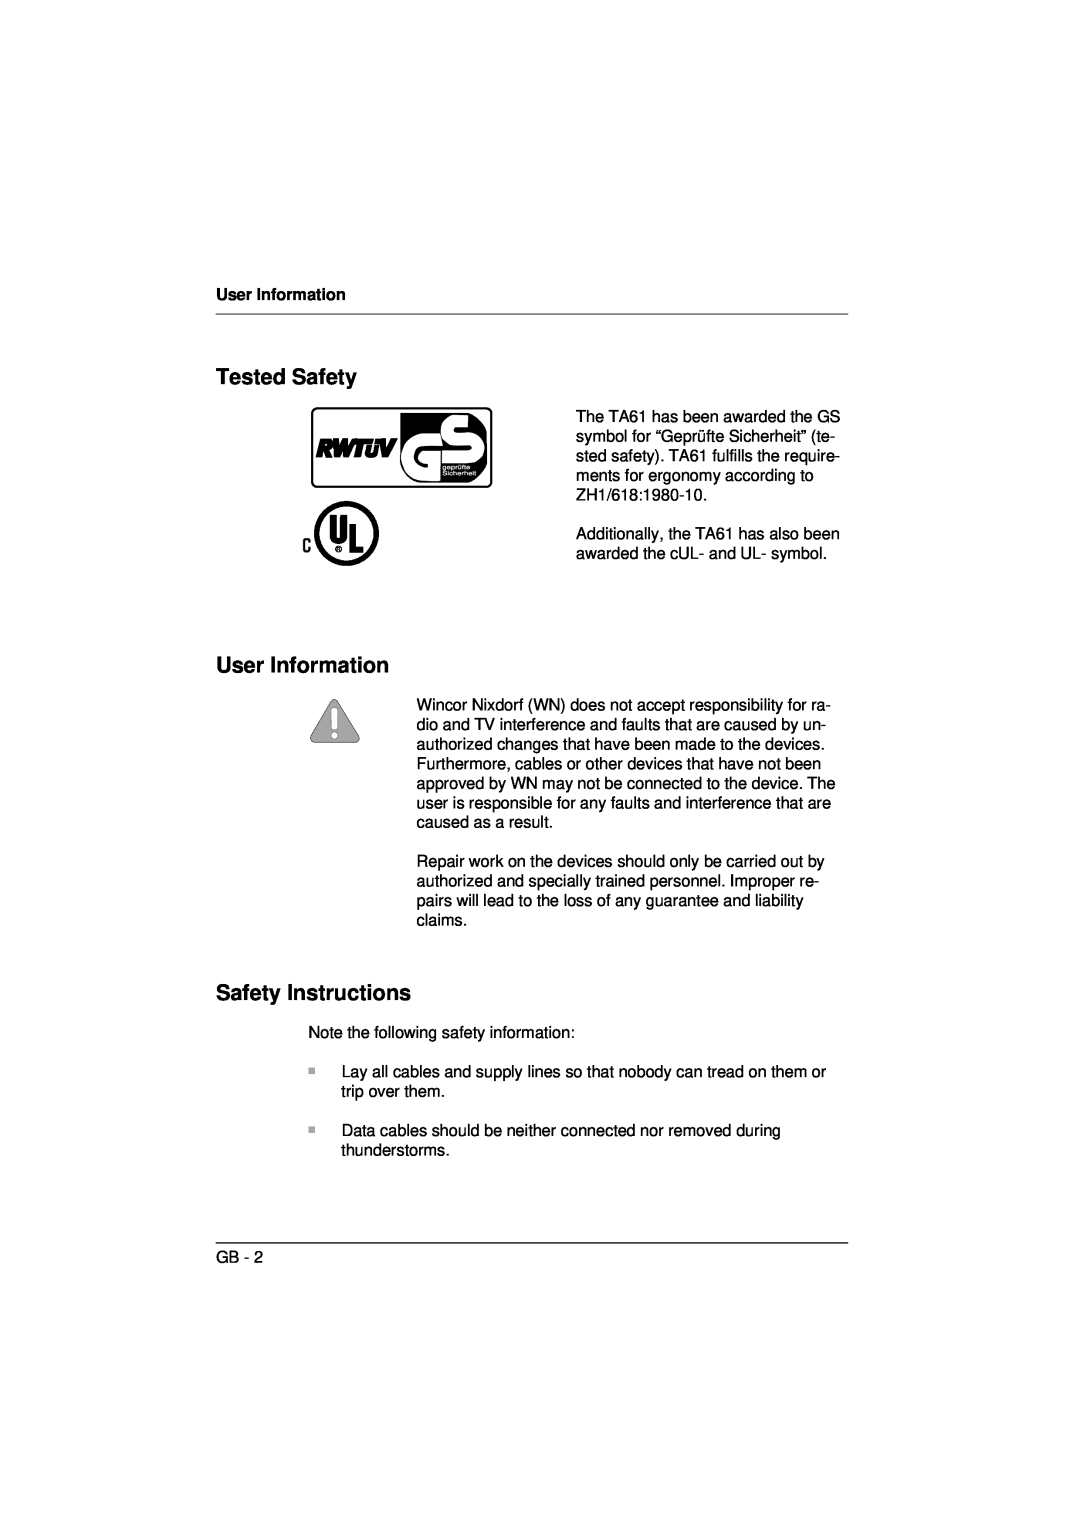 Microsoft TA61 manual Tested Safety, User Information, Safety Instructions 